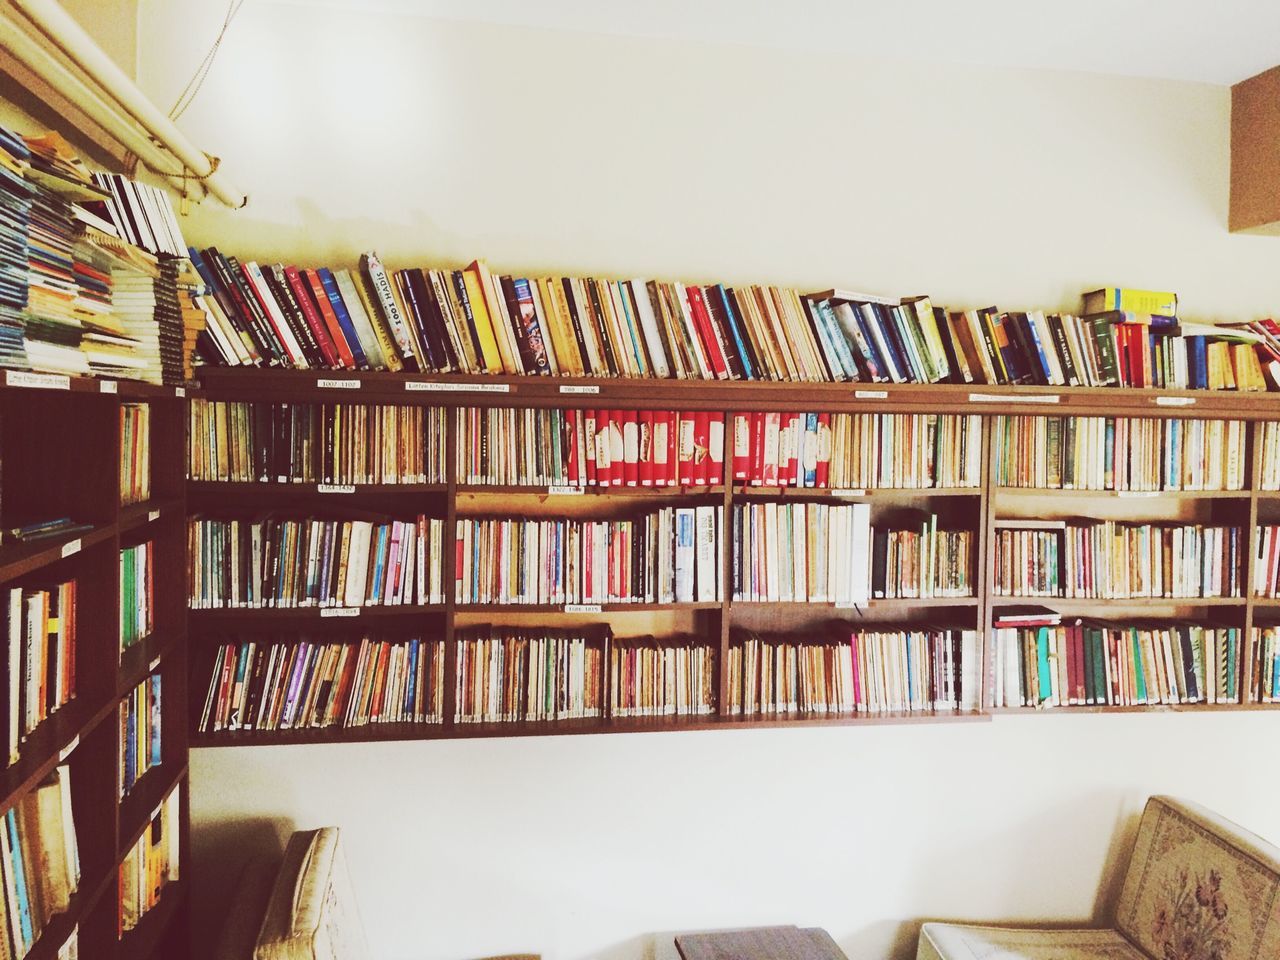 indoors, book, education, shelf, variation, large group of objects, architecture, built structure, arrangement, bookshelf, multi colored, home interior, order, in a row, no people, table, choice, balcony, abundance, library